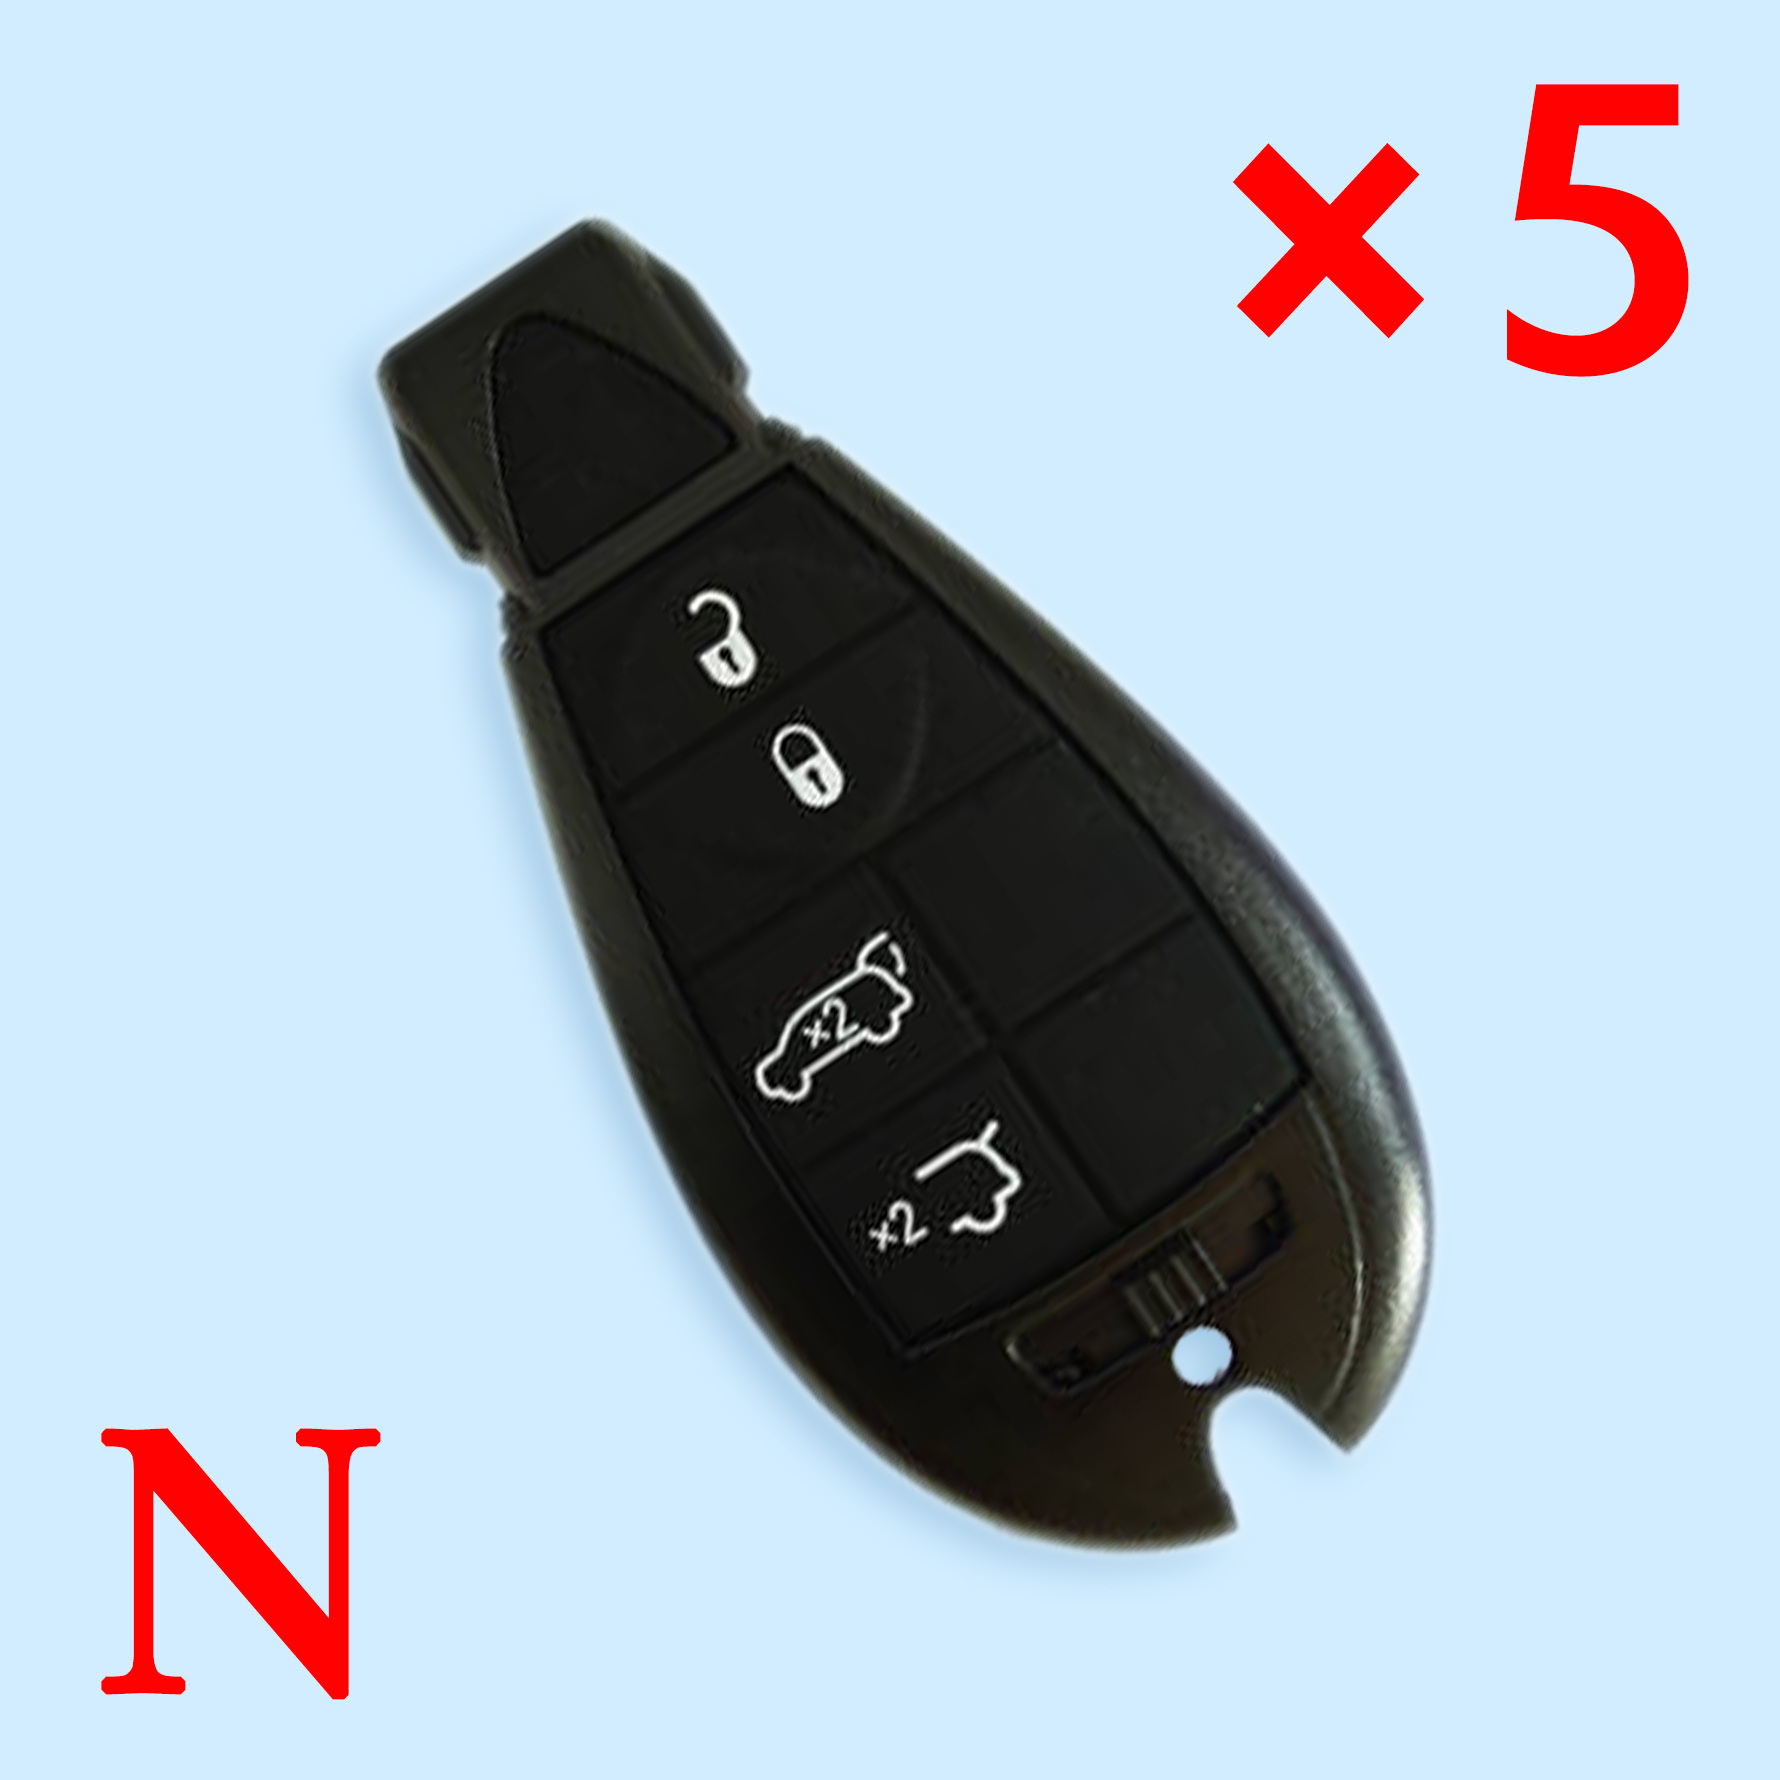 4 Buttons Remote Shell without Panic for Jeep Chrysler Fobik Dodge - Pack of 5